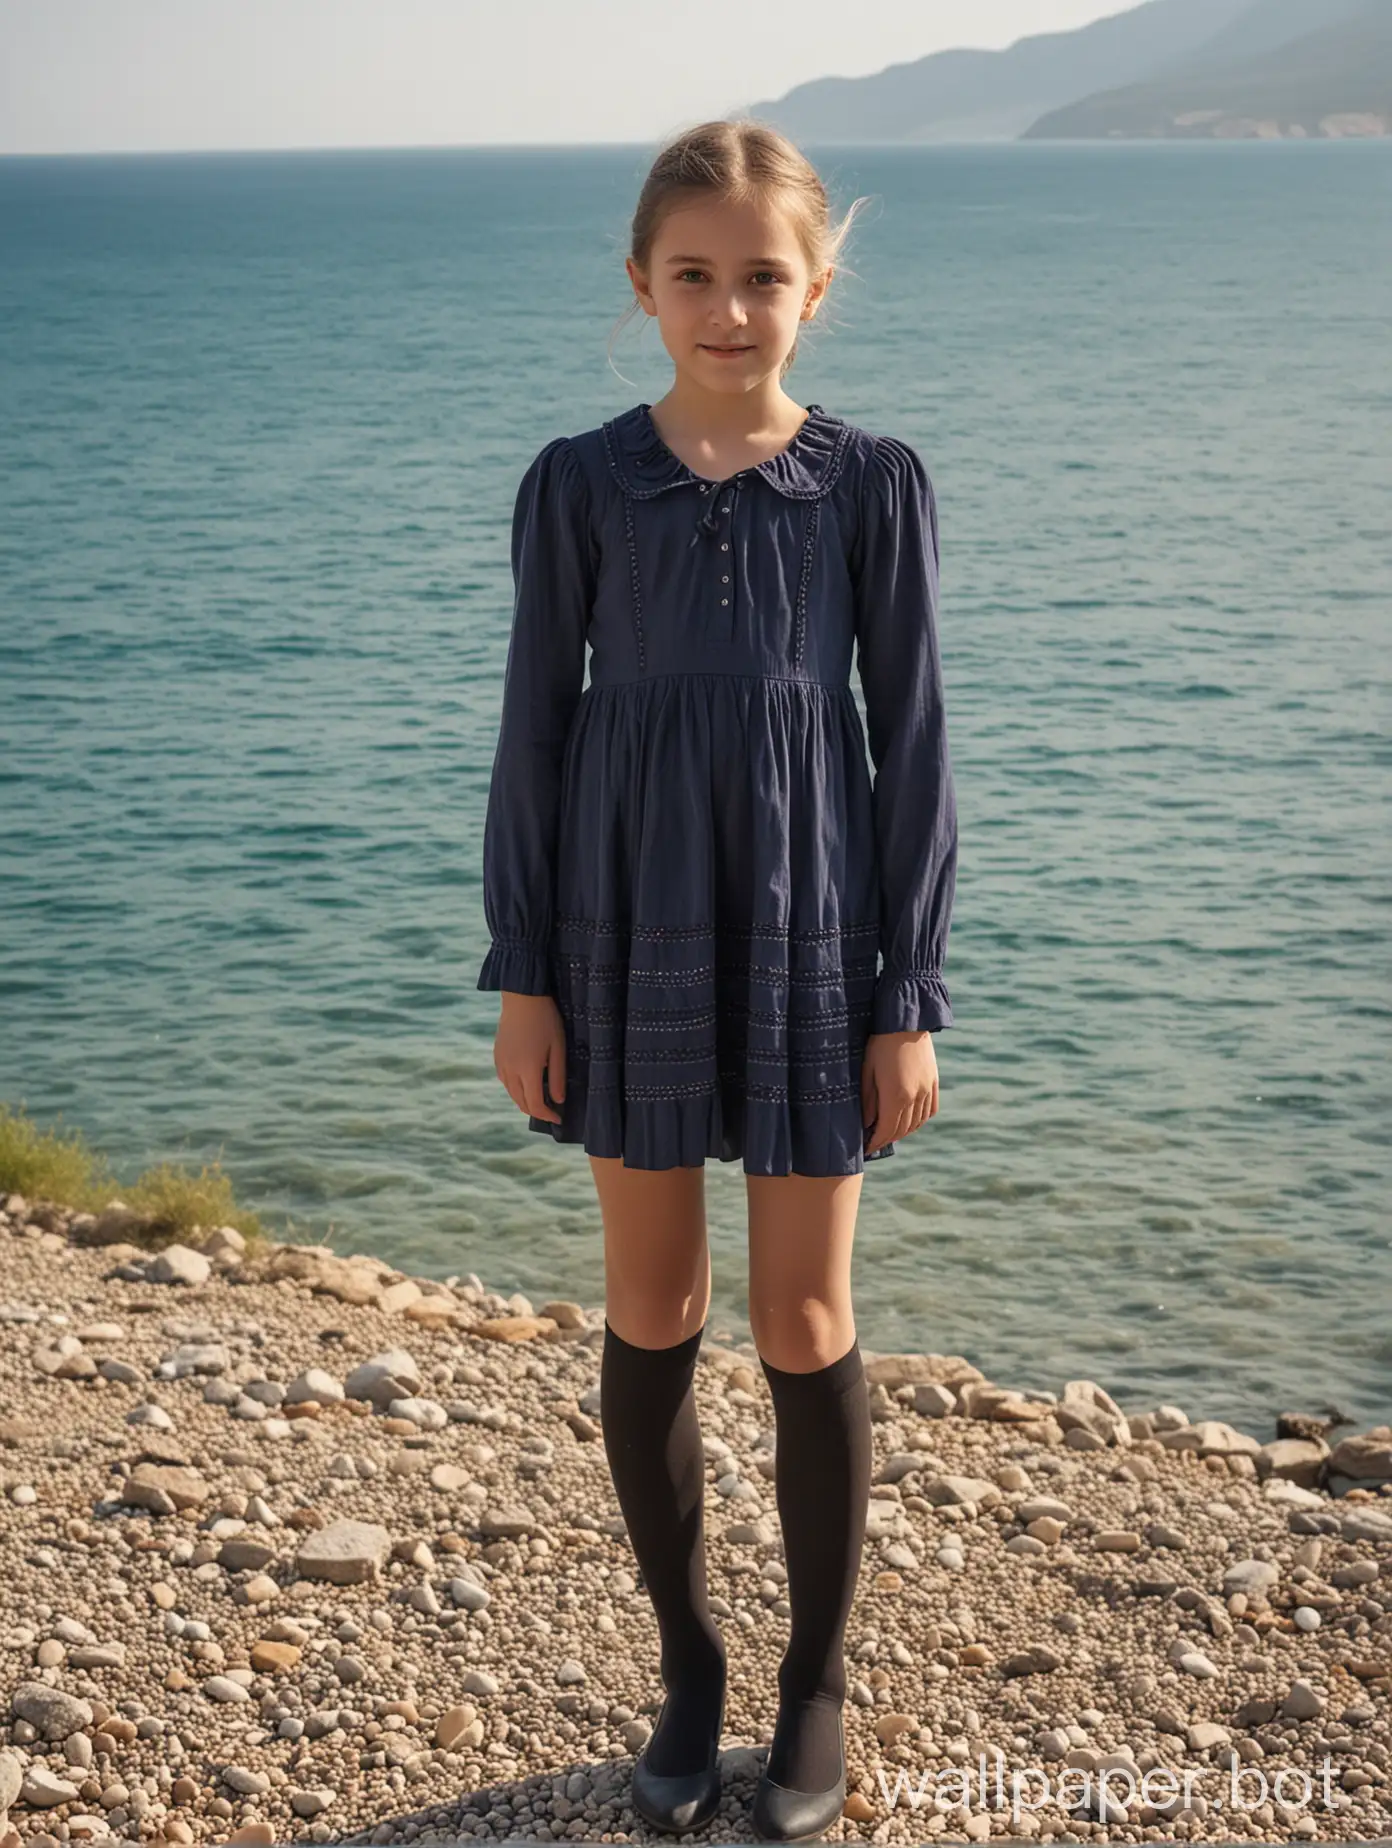 Crimea-Sea-View-10YearOld-Girl-in-Short-Dress-and-Stockings